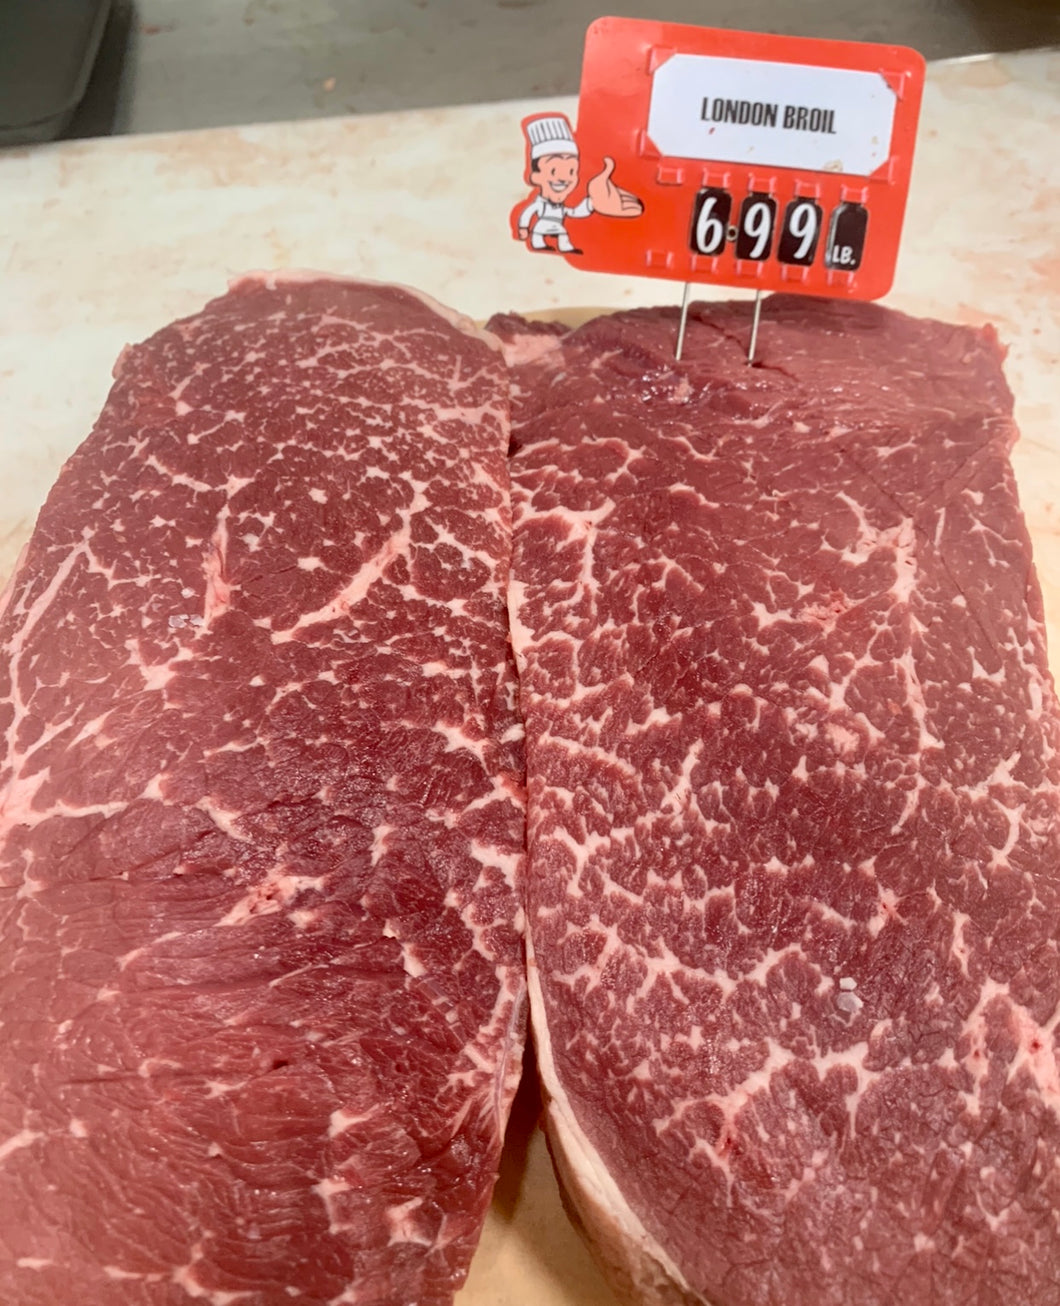 London Broil (Must Call or Email for Delivery)